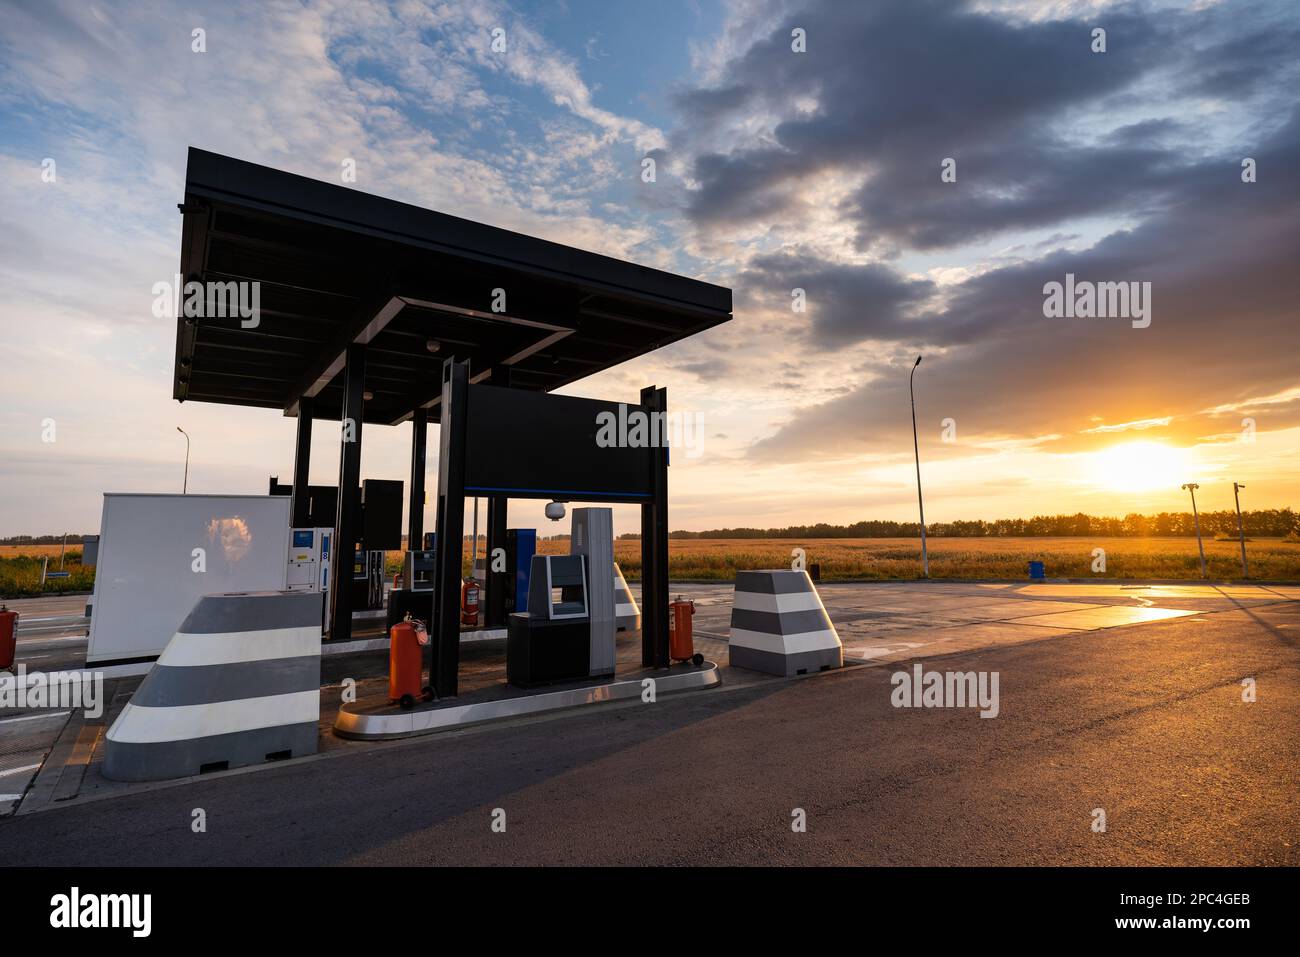 Modern self service gas station against the backdrop of a dramatic sunset sky Stock Photo